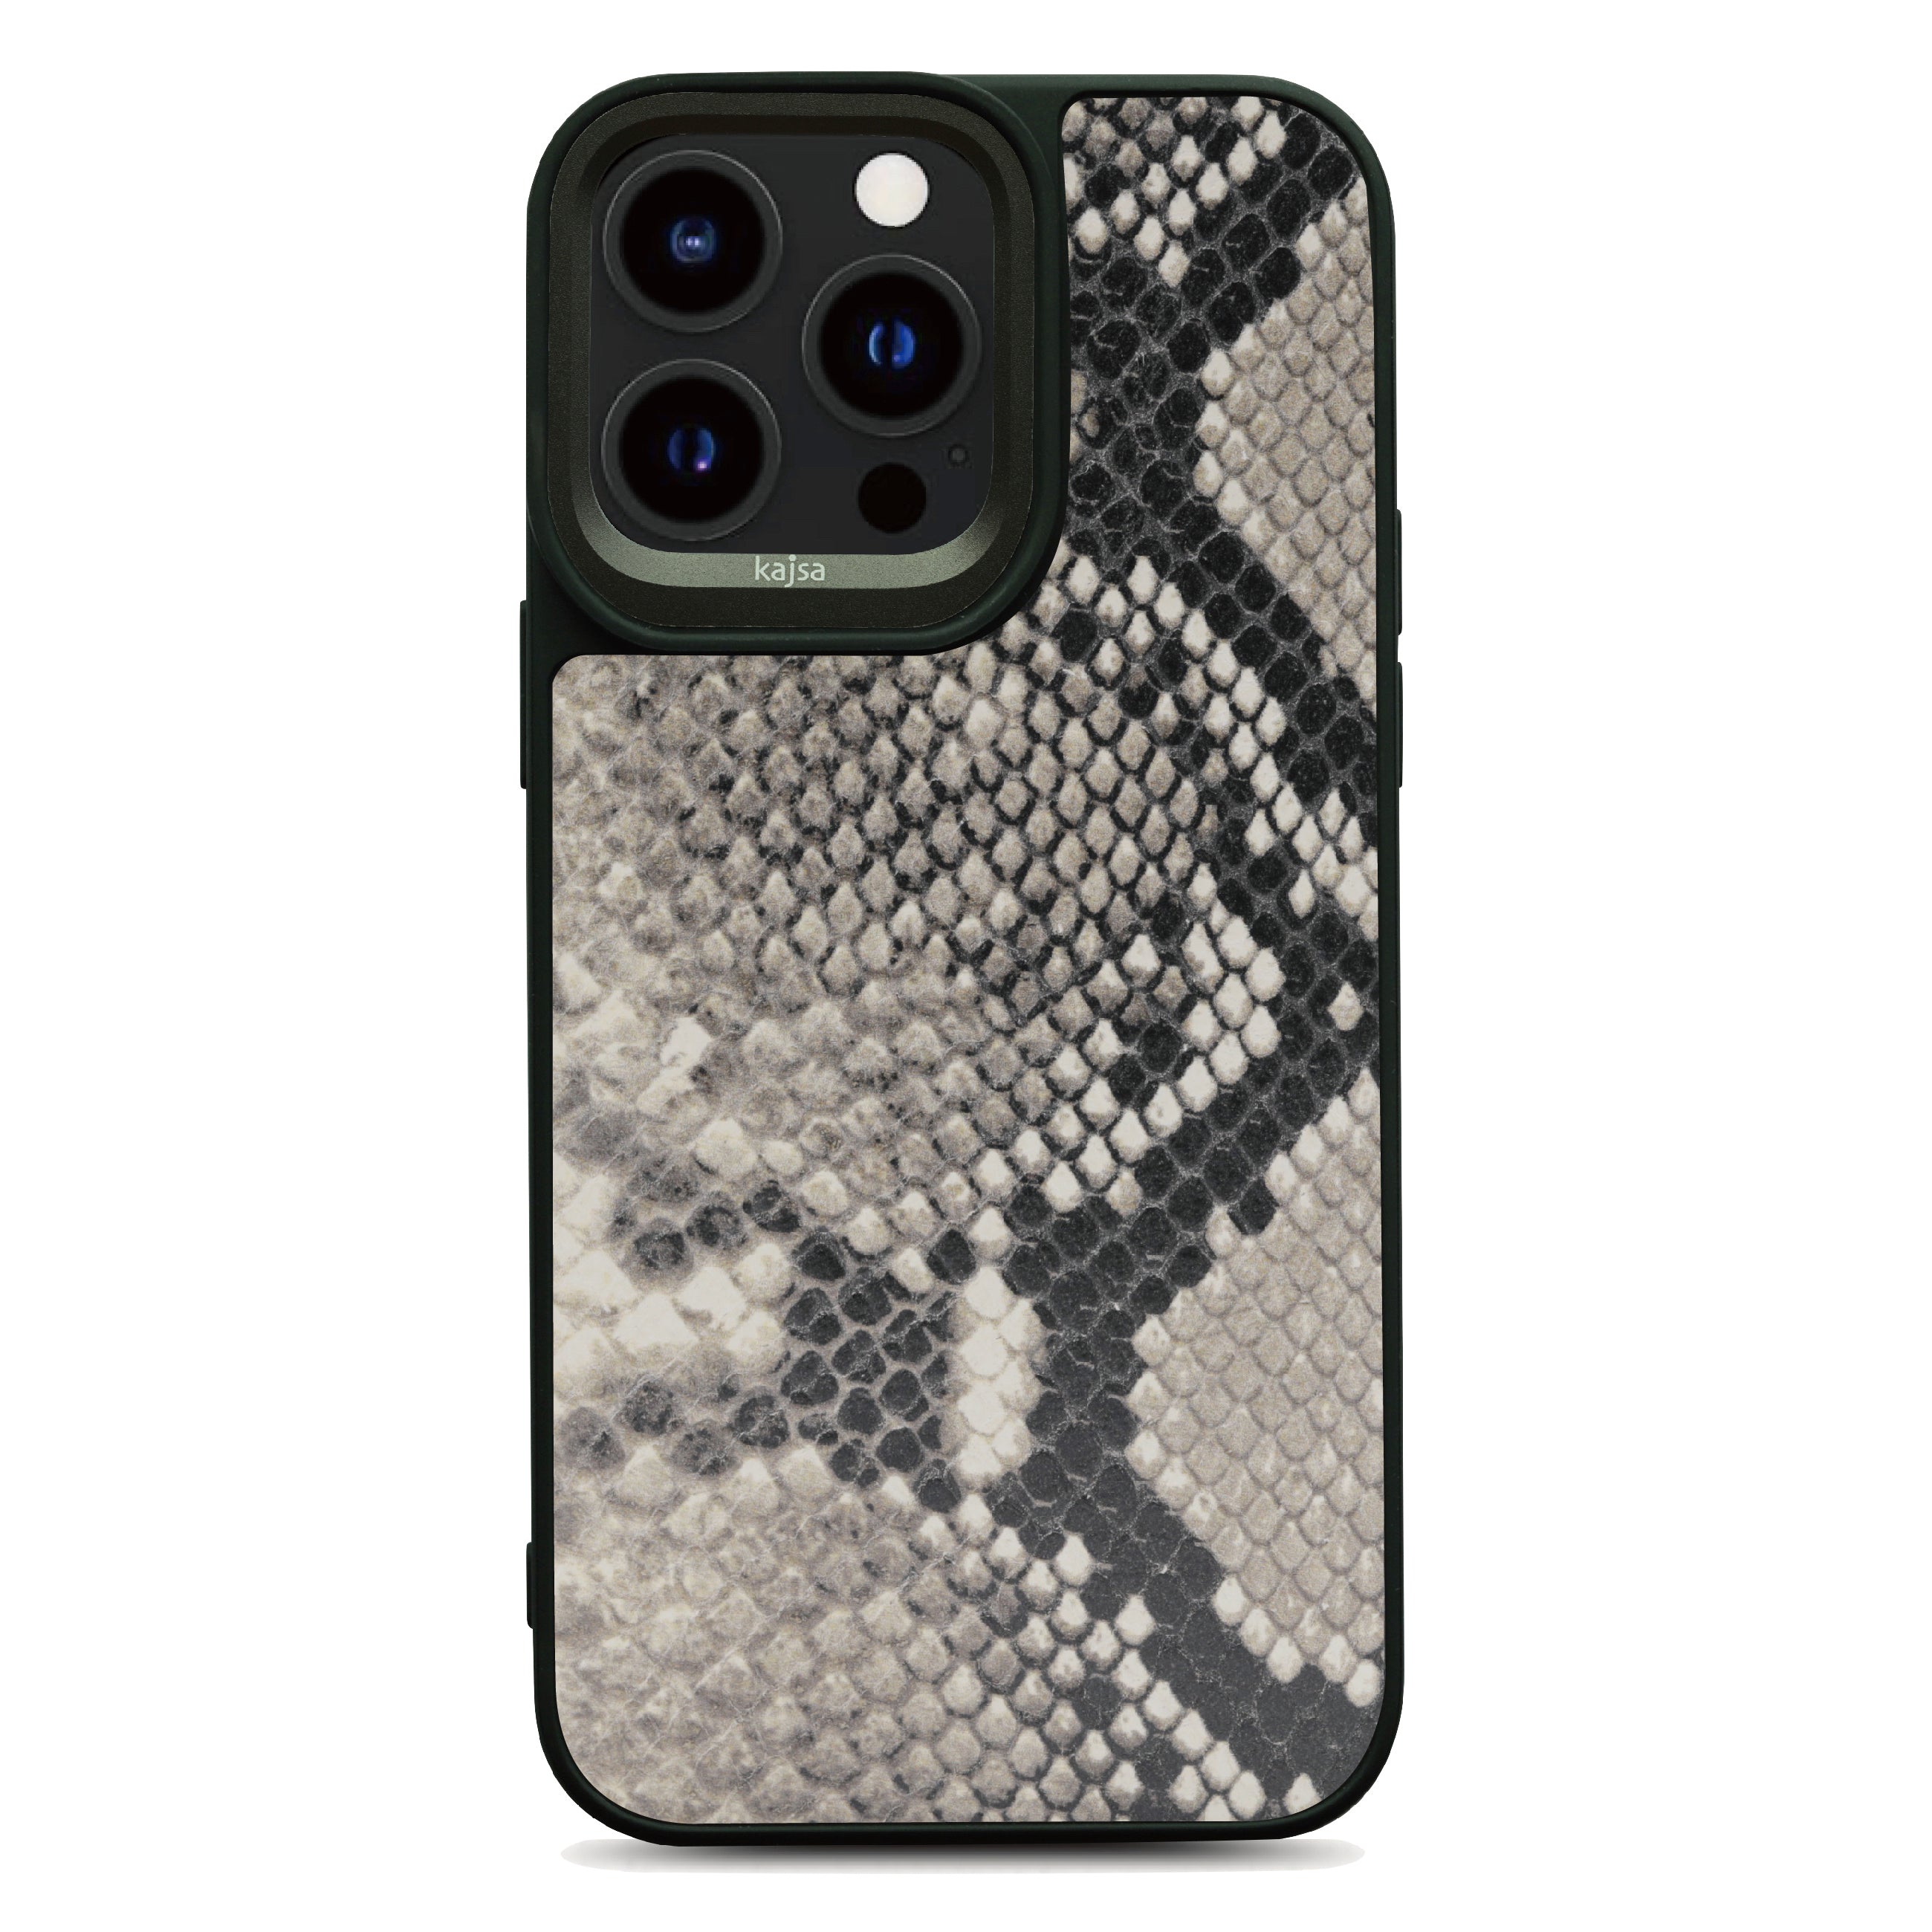 Glamorous Collection - Genuine Leather Snake Pattern Back Case for iPhone 14-Phone Case- phone case - phone cases- phone cover- iphone cover- iphone case- iphone cases- leather case- leather cases- DIYCASE - custom case - leather cover - hand strap case - croco pattern case - snake pattern case - carbon fiber phone case - phone case brand - unique phone case - high quality - phone case brand - protective case - buy phone case hong kong - online buy phone case - iphone‎手機殼 - 客製化手機殼 - samsung ‎手機殼 - 香港手機殼 - 買